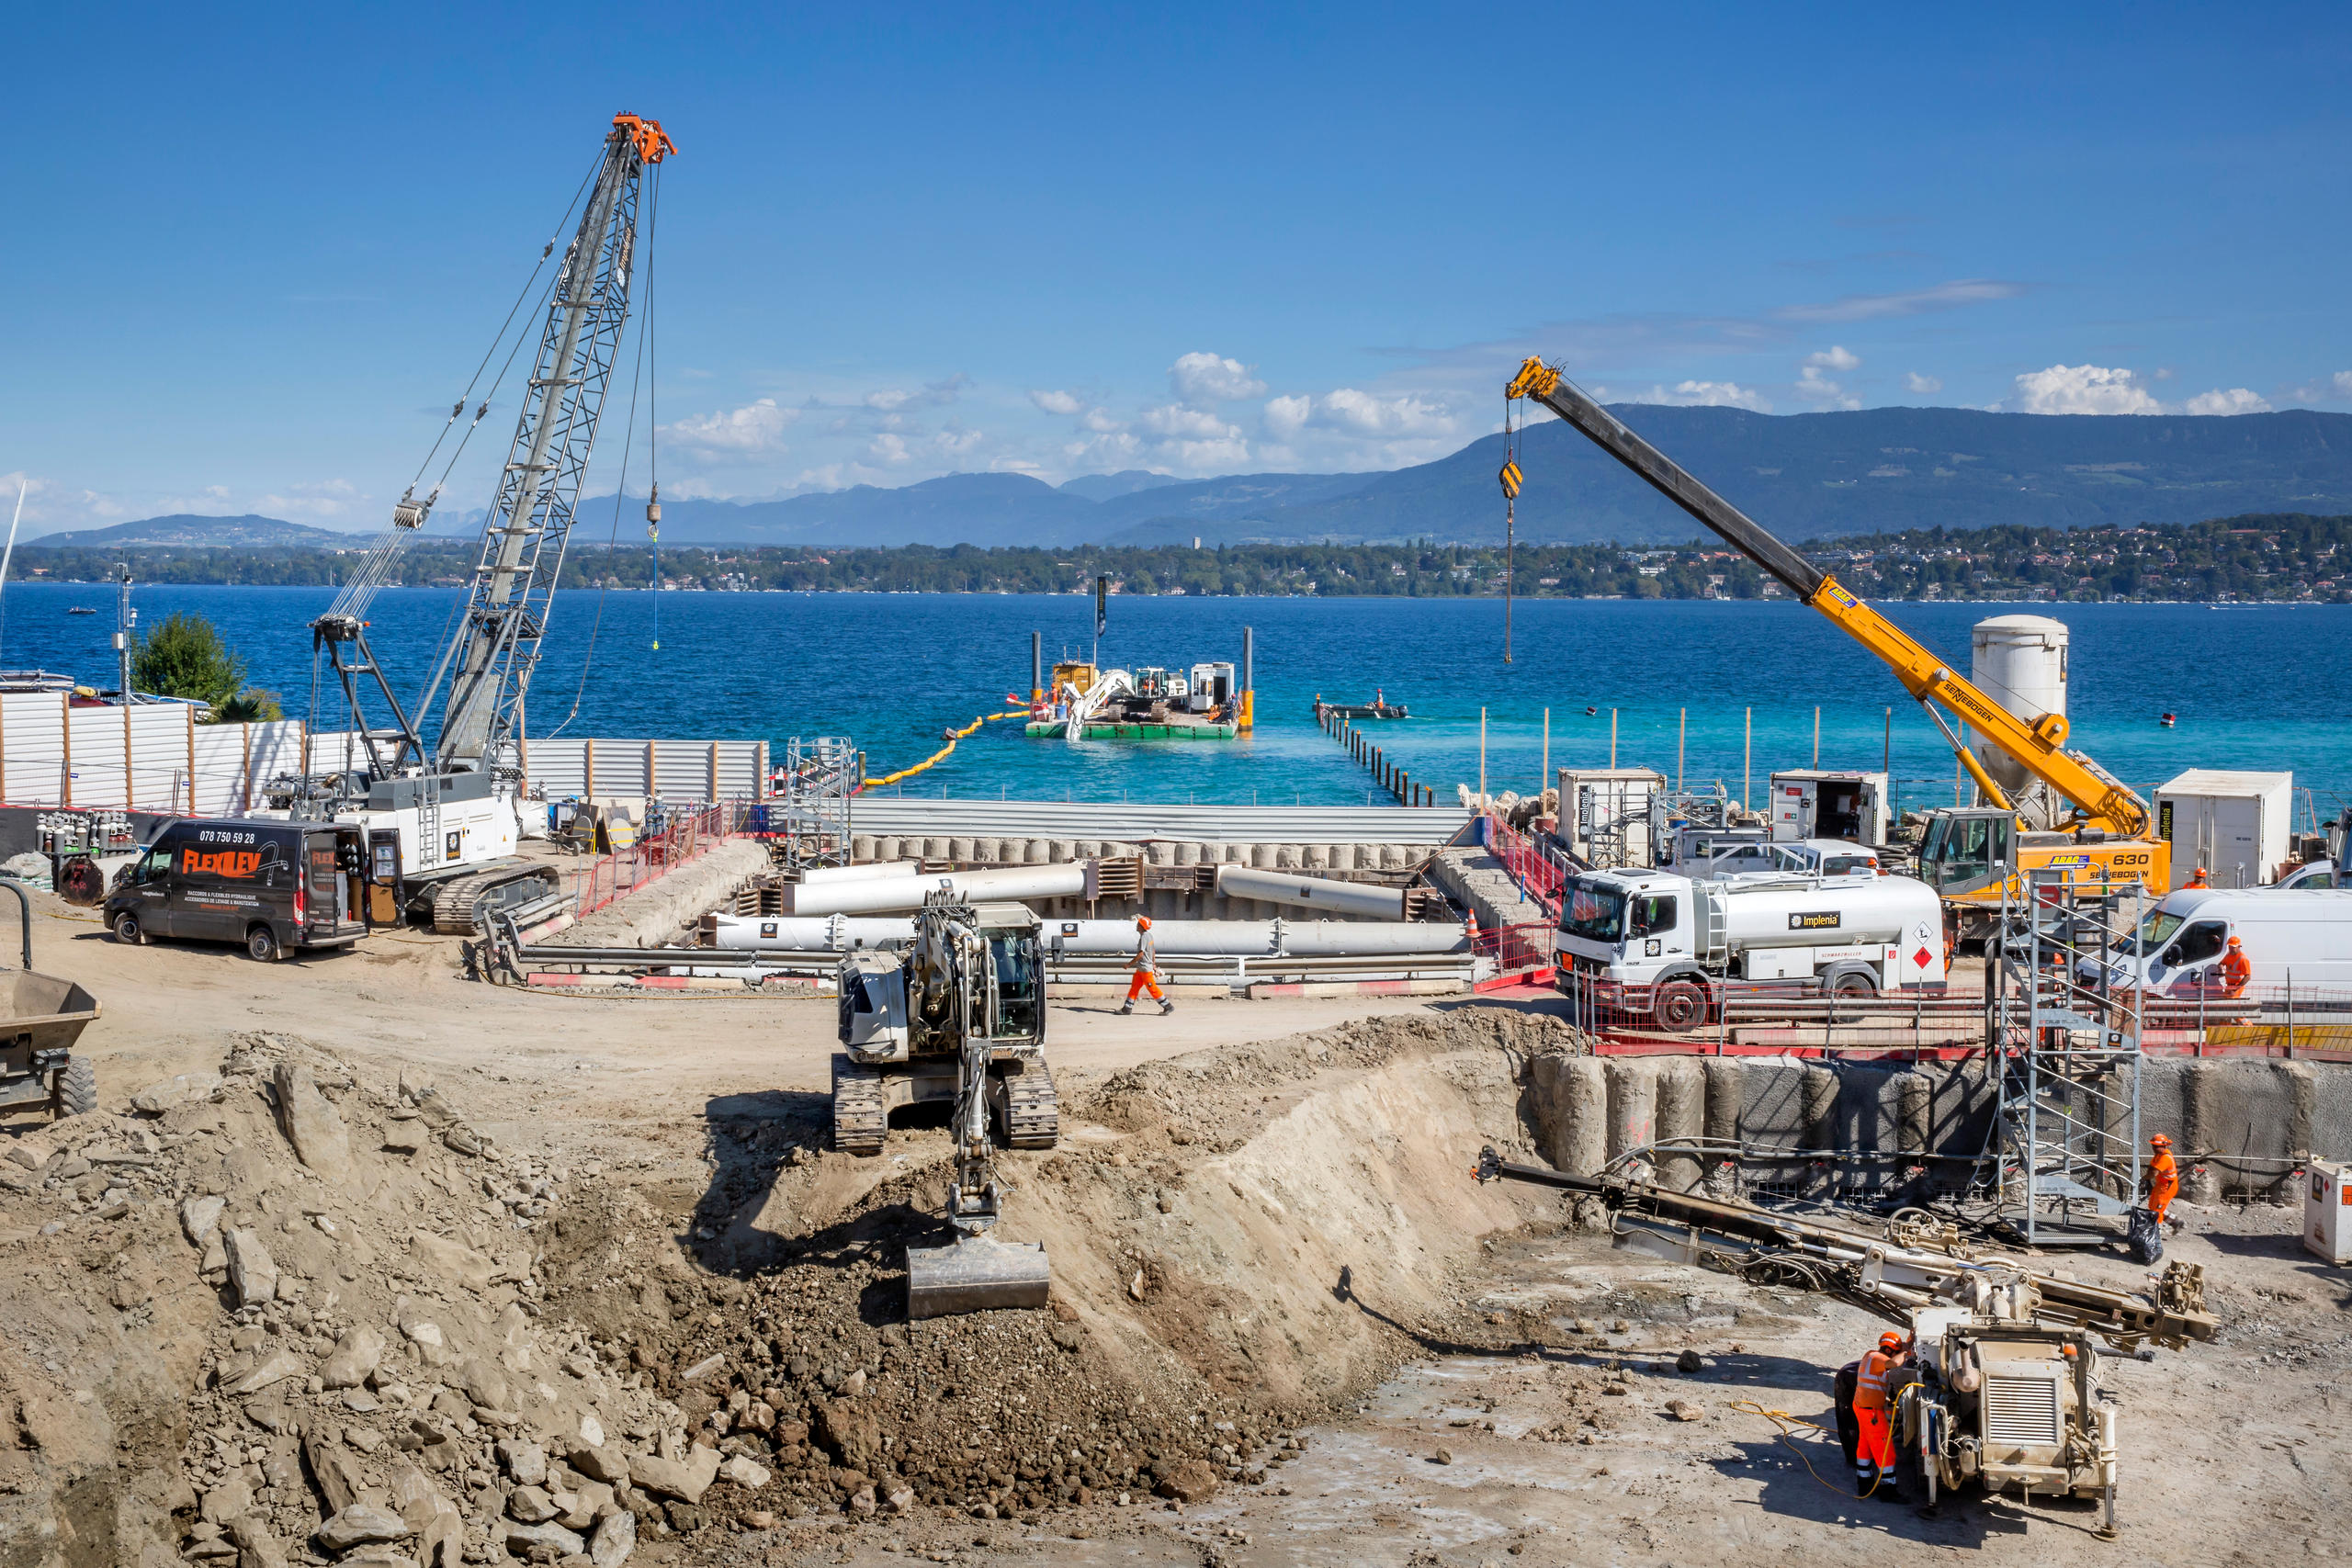 A new pumping station is under construction north of Geneva